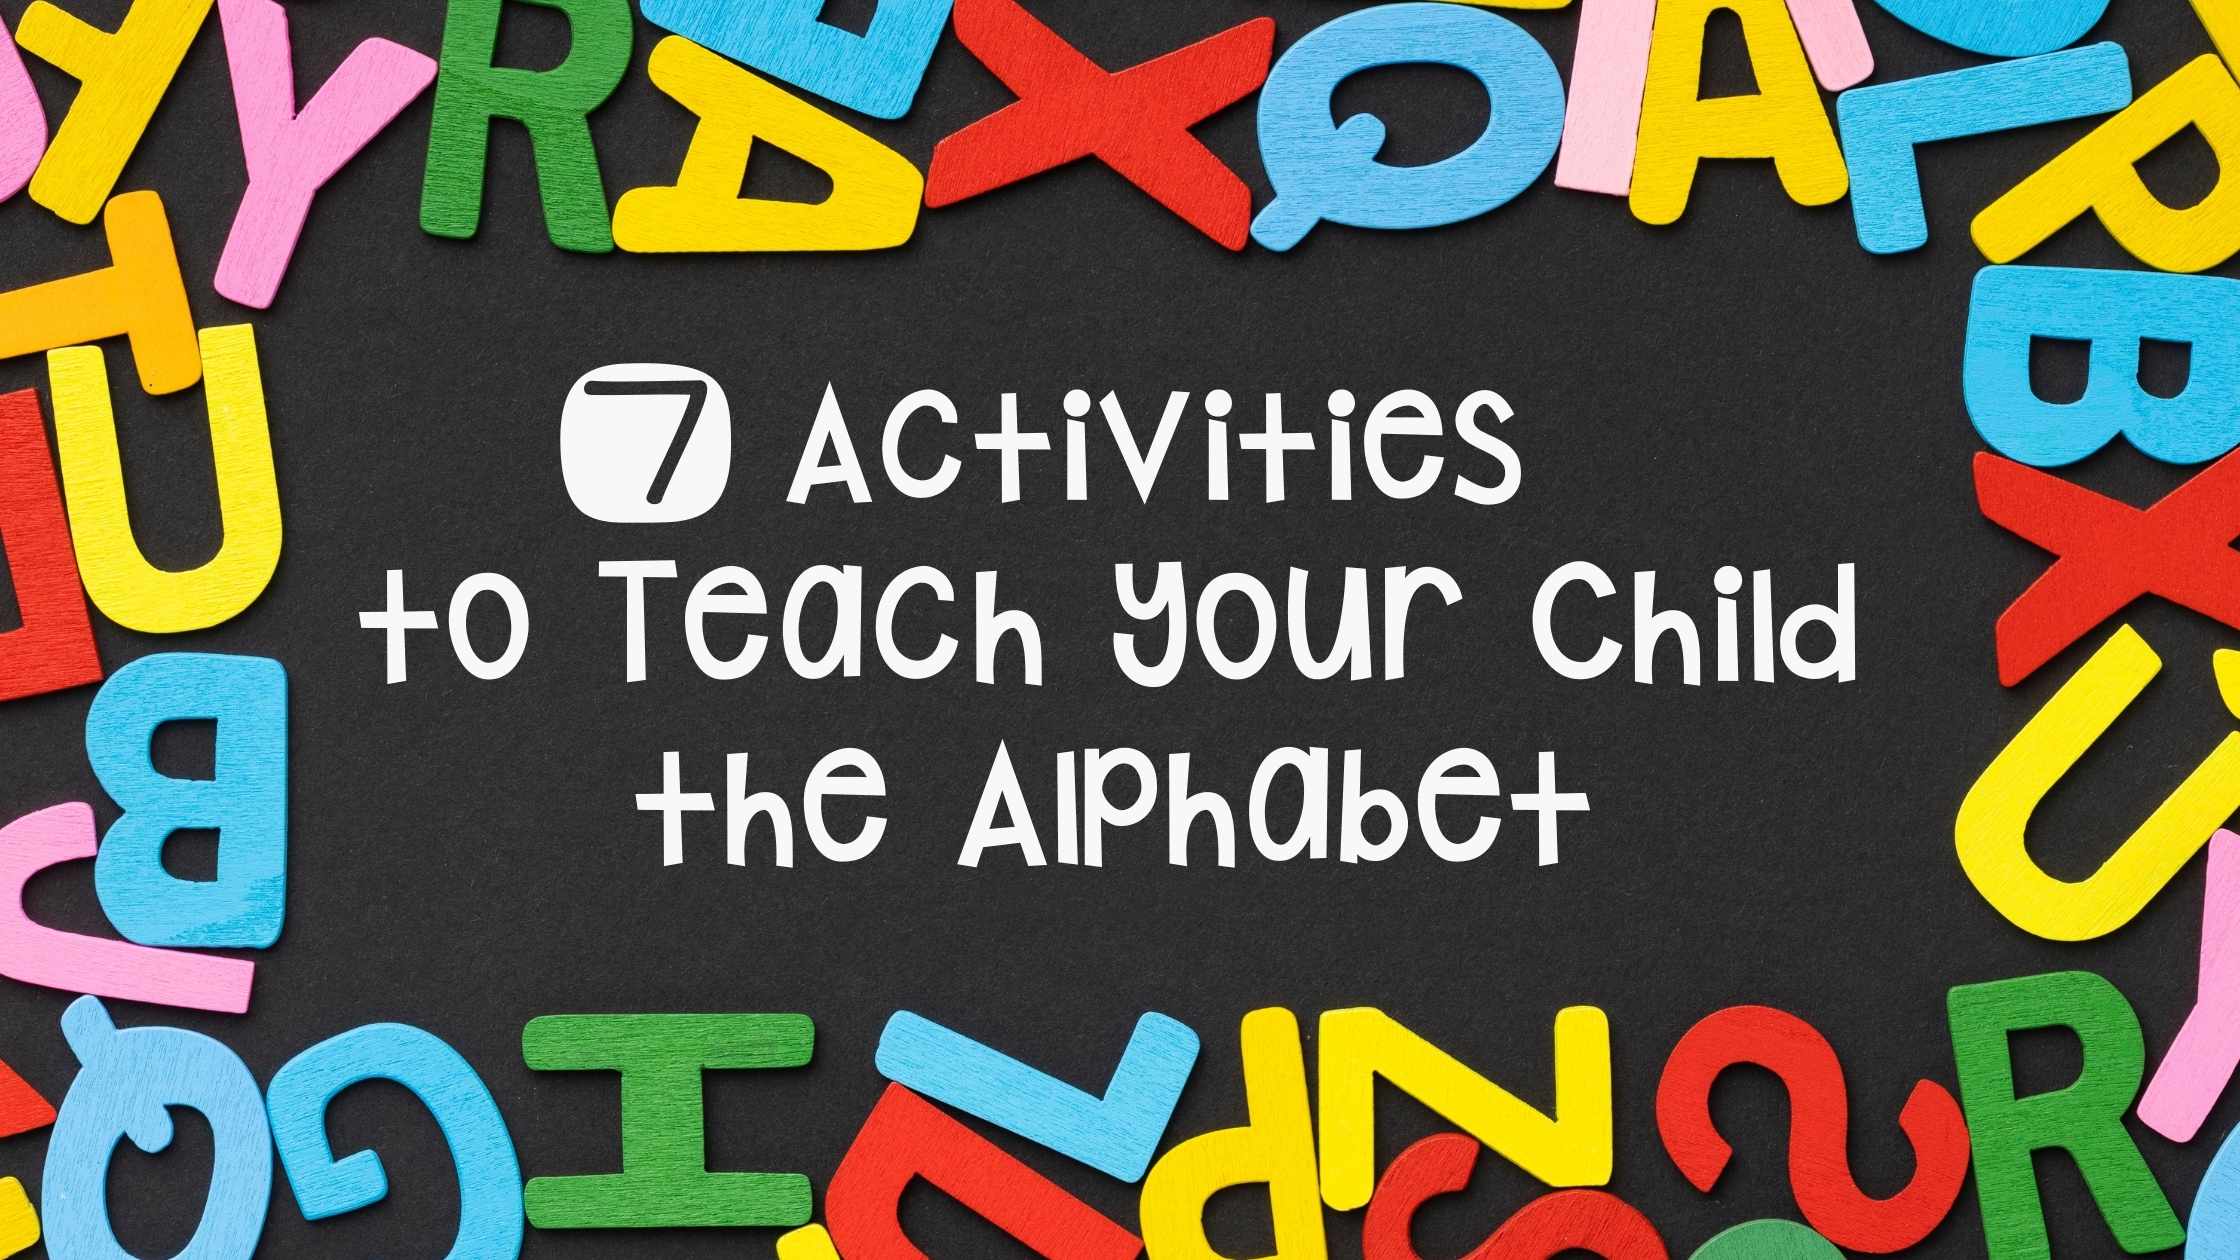 7 Fun-and-Easy Activities to Teach Your Preschooler Letter Recognition